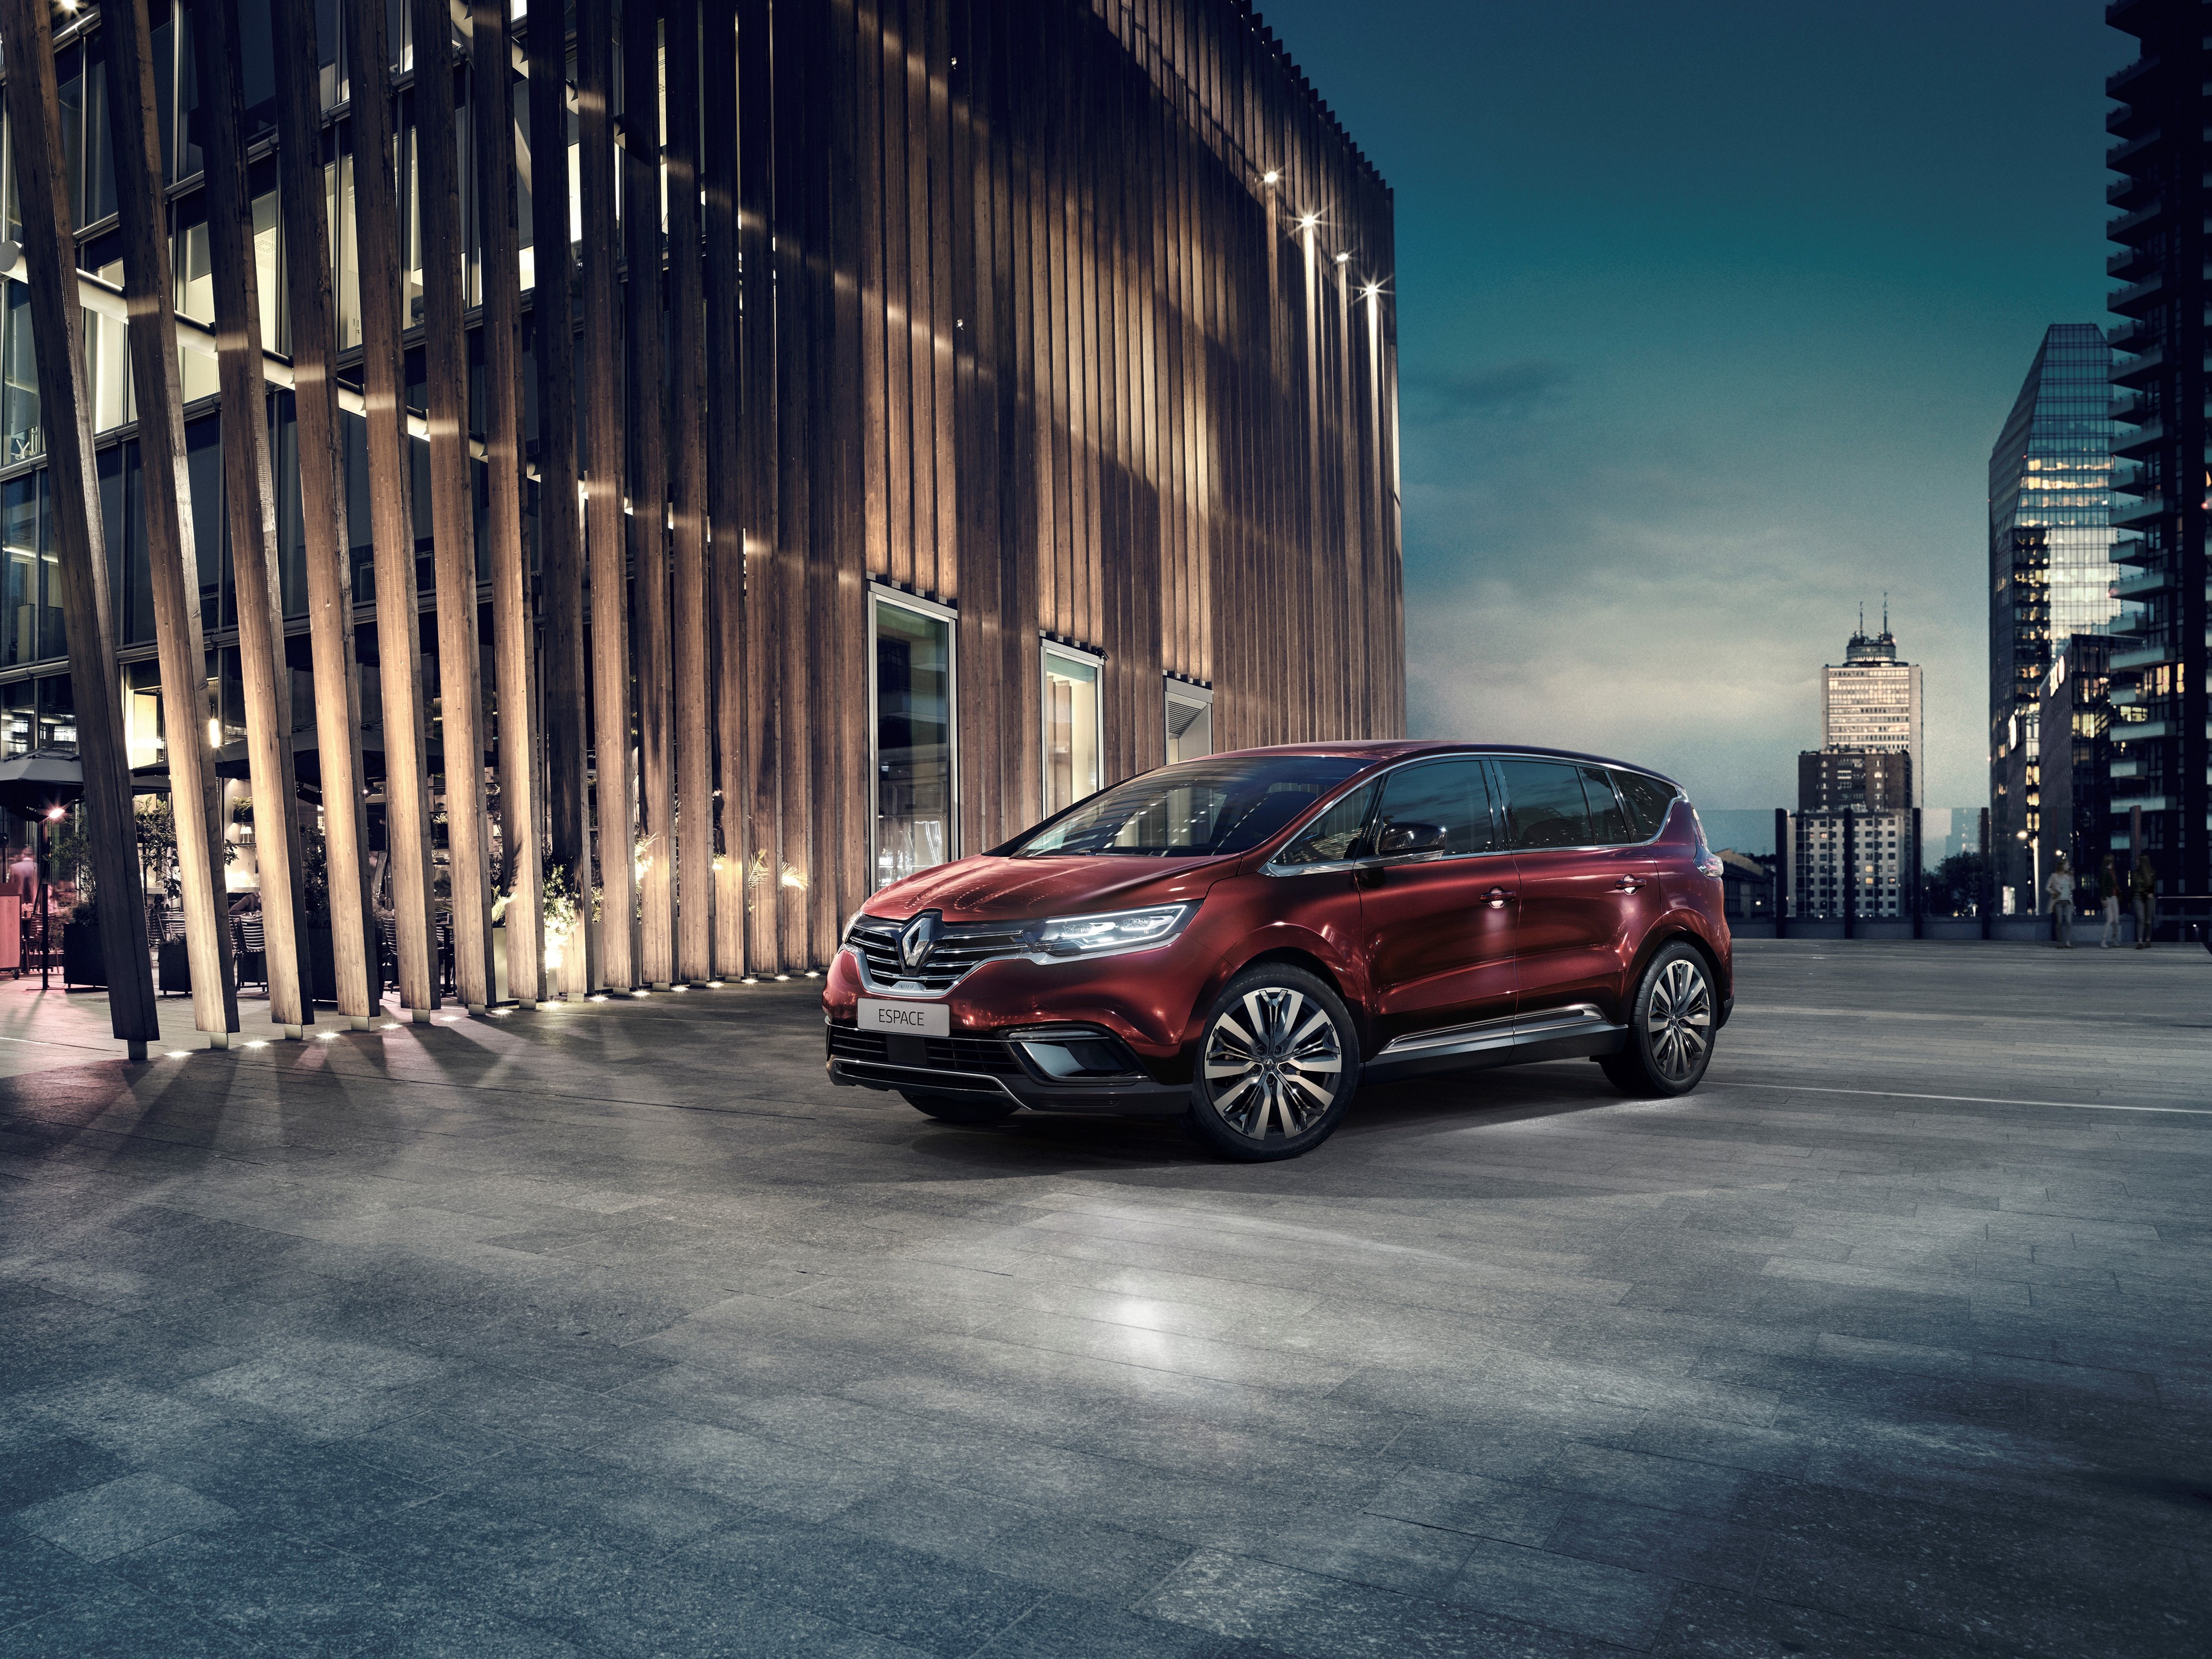 Renault Espace 4k specifications